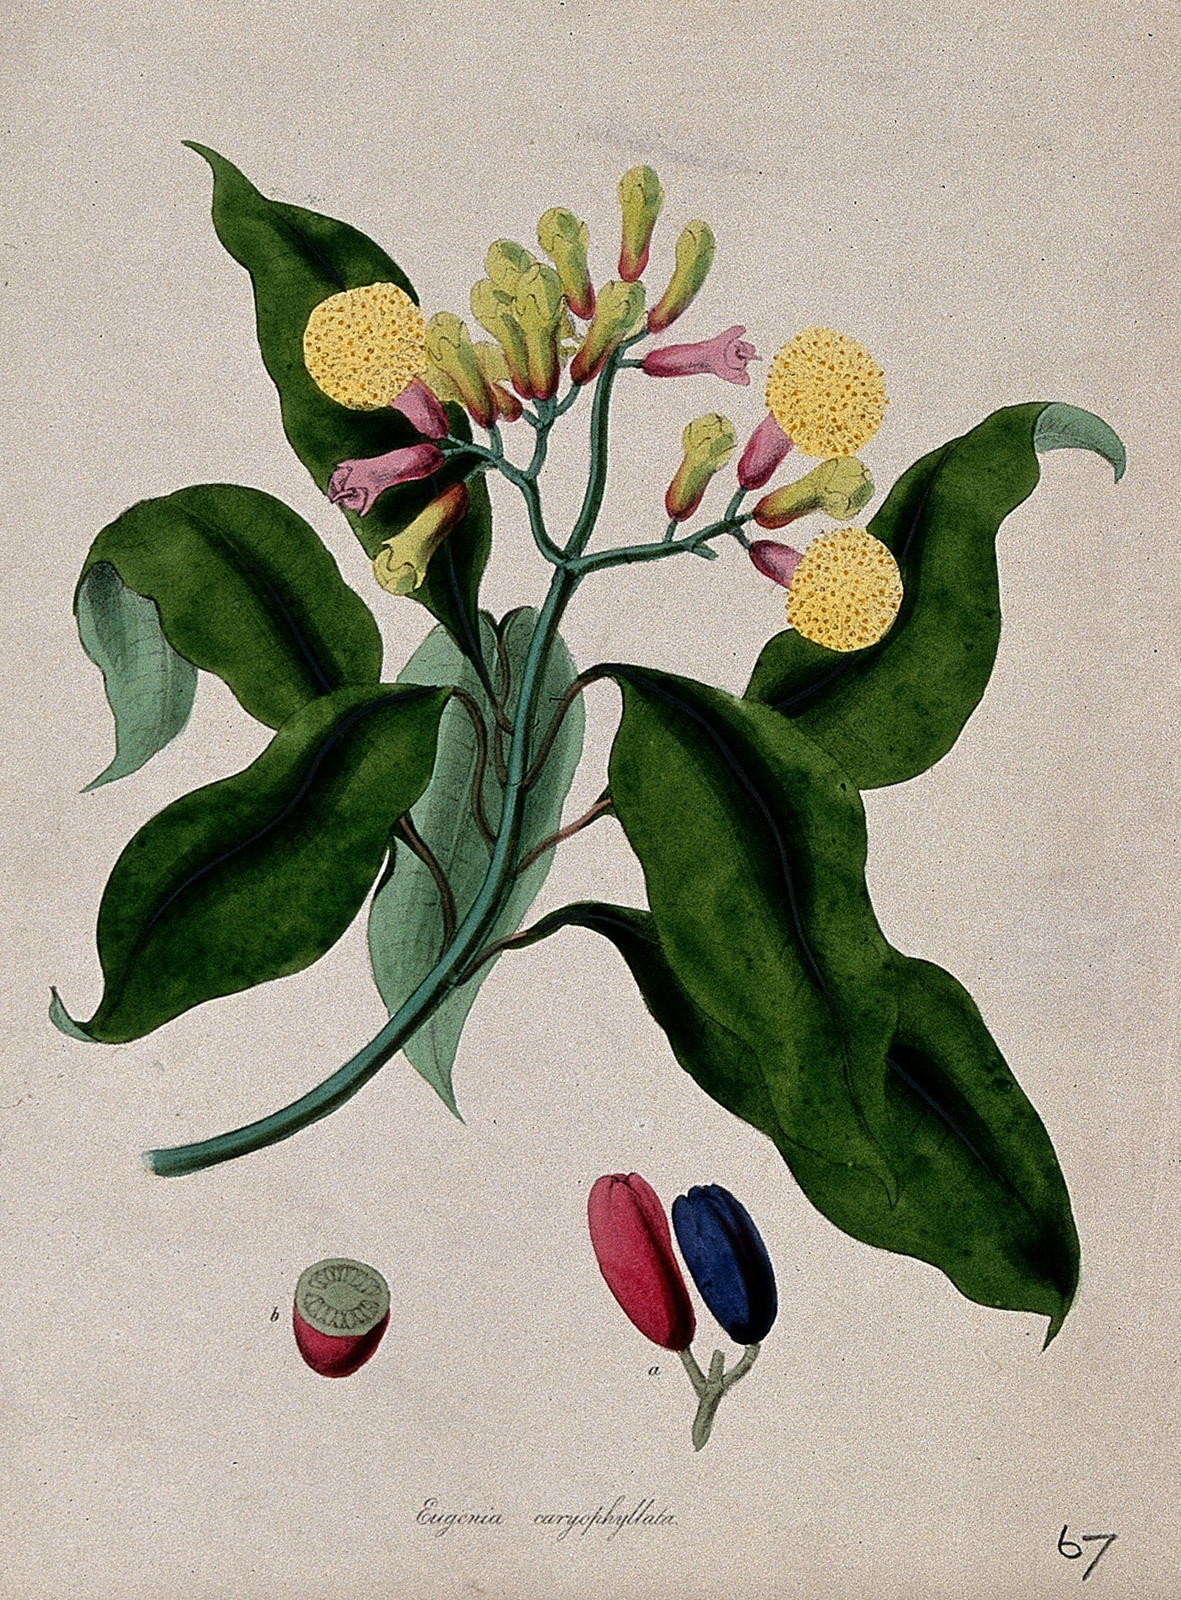 Colour drawing of a flowering branch of a clove tree, with a fruit in close up and cut in half at the bottom. The flowers are pink and yellow, whicle the fruits are dark pink and purple.